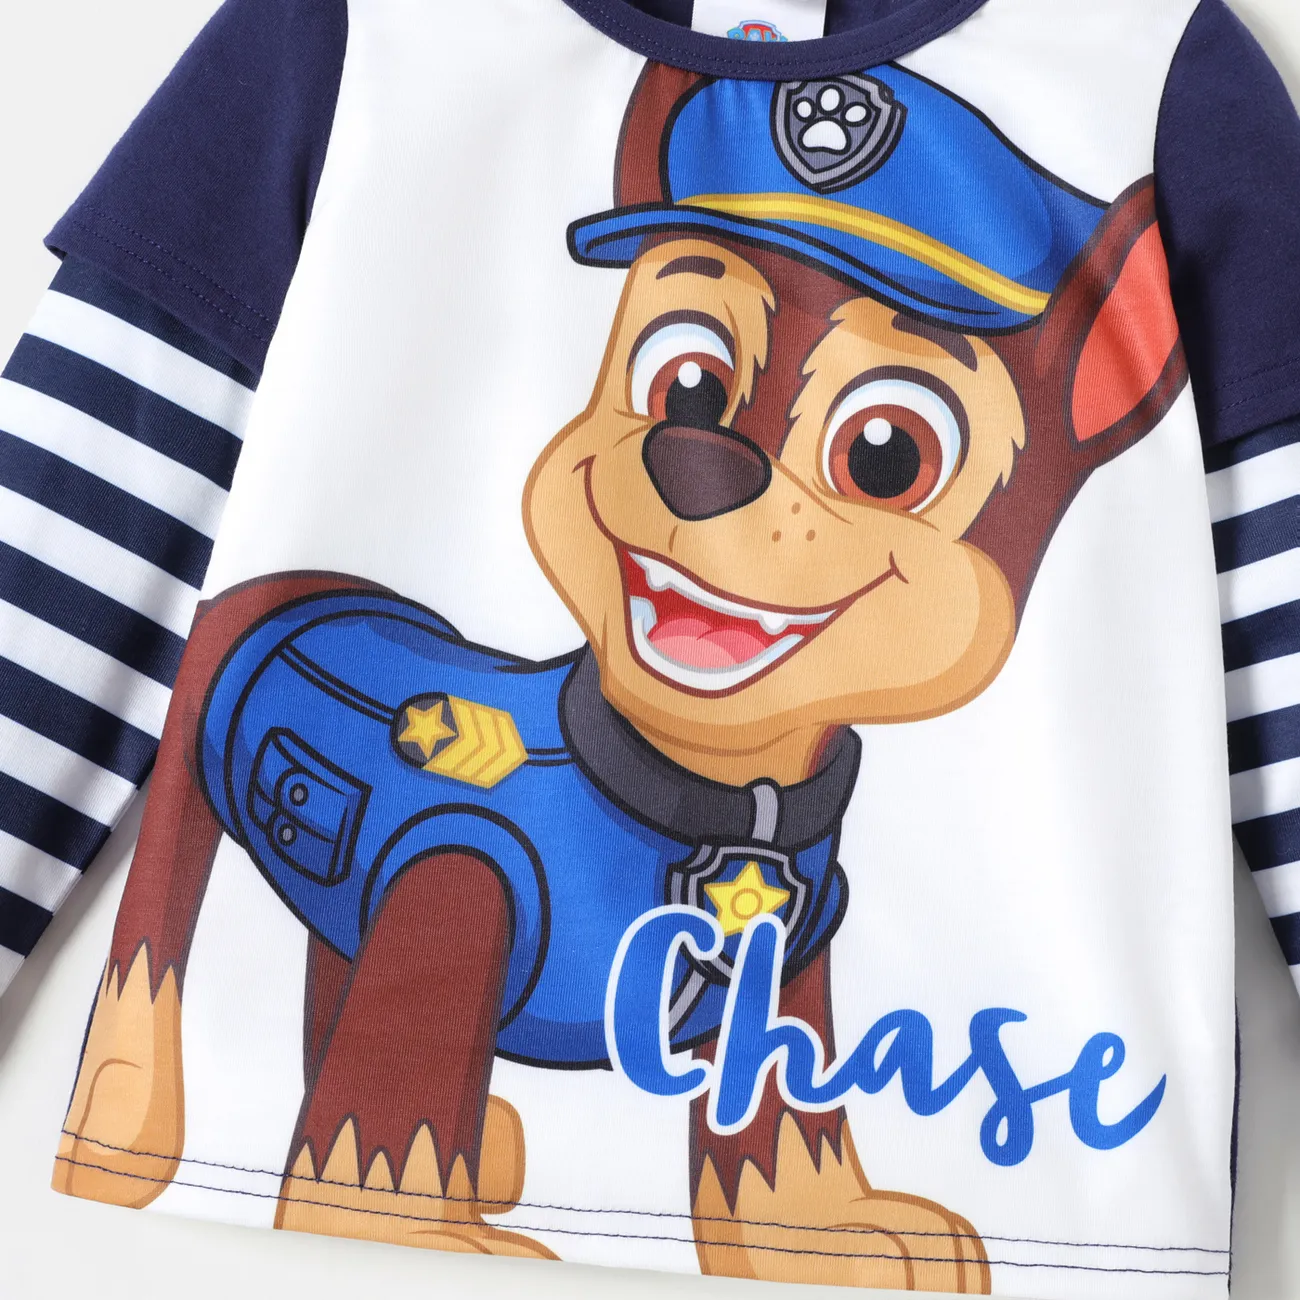 PAW Patrol Toddler Only Mobile Long-sleeve PatPat Tee Striped $13.99 US Cotton Girl/Boy